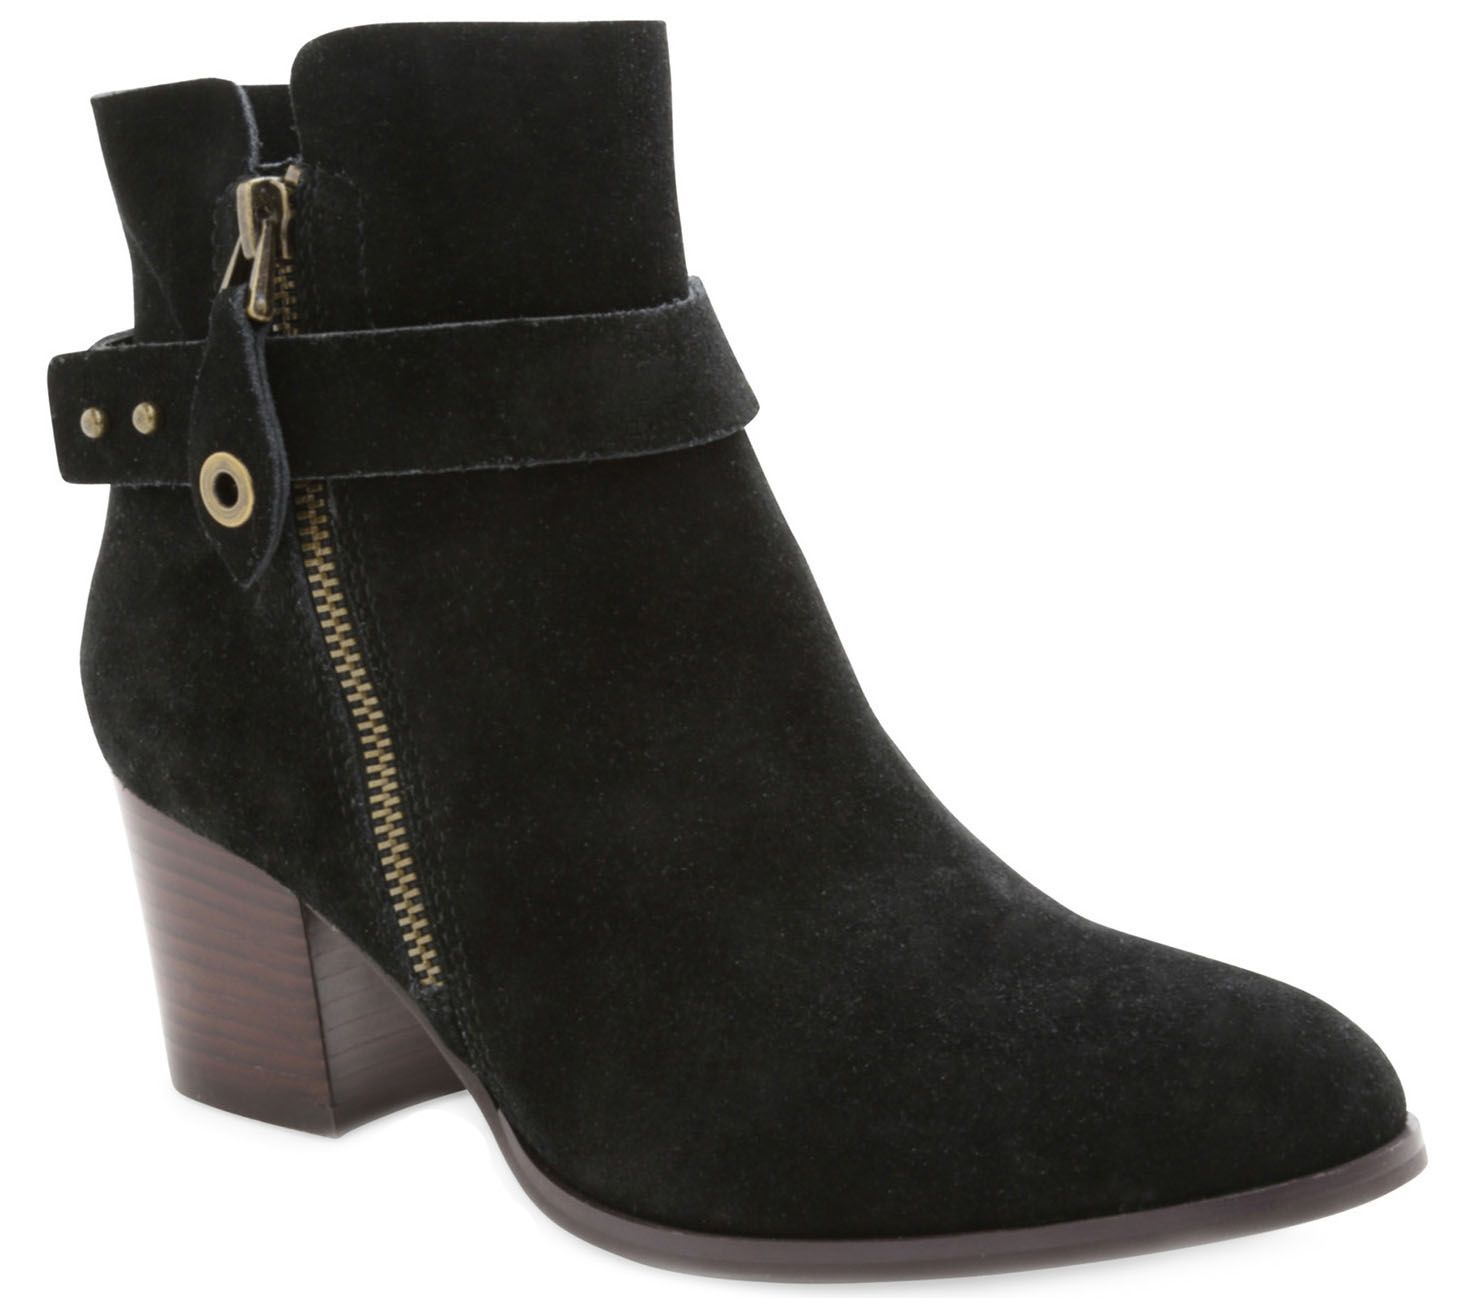 Kensie Suede Leather Ankle Booties - Seamore — QVC.com